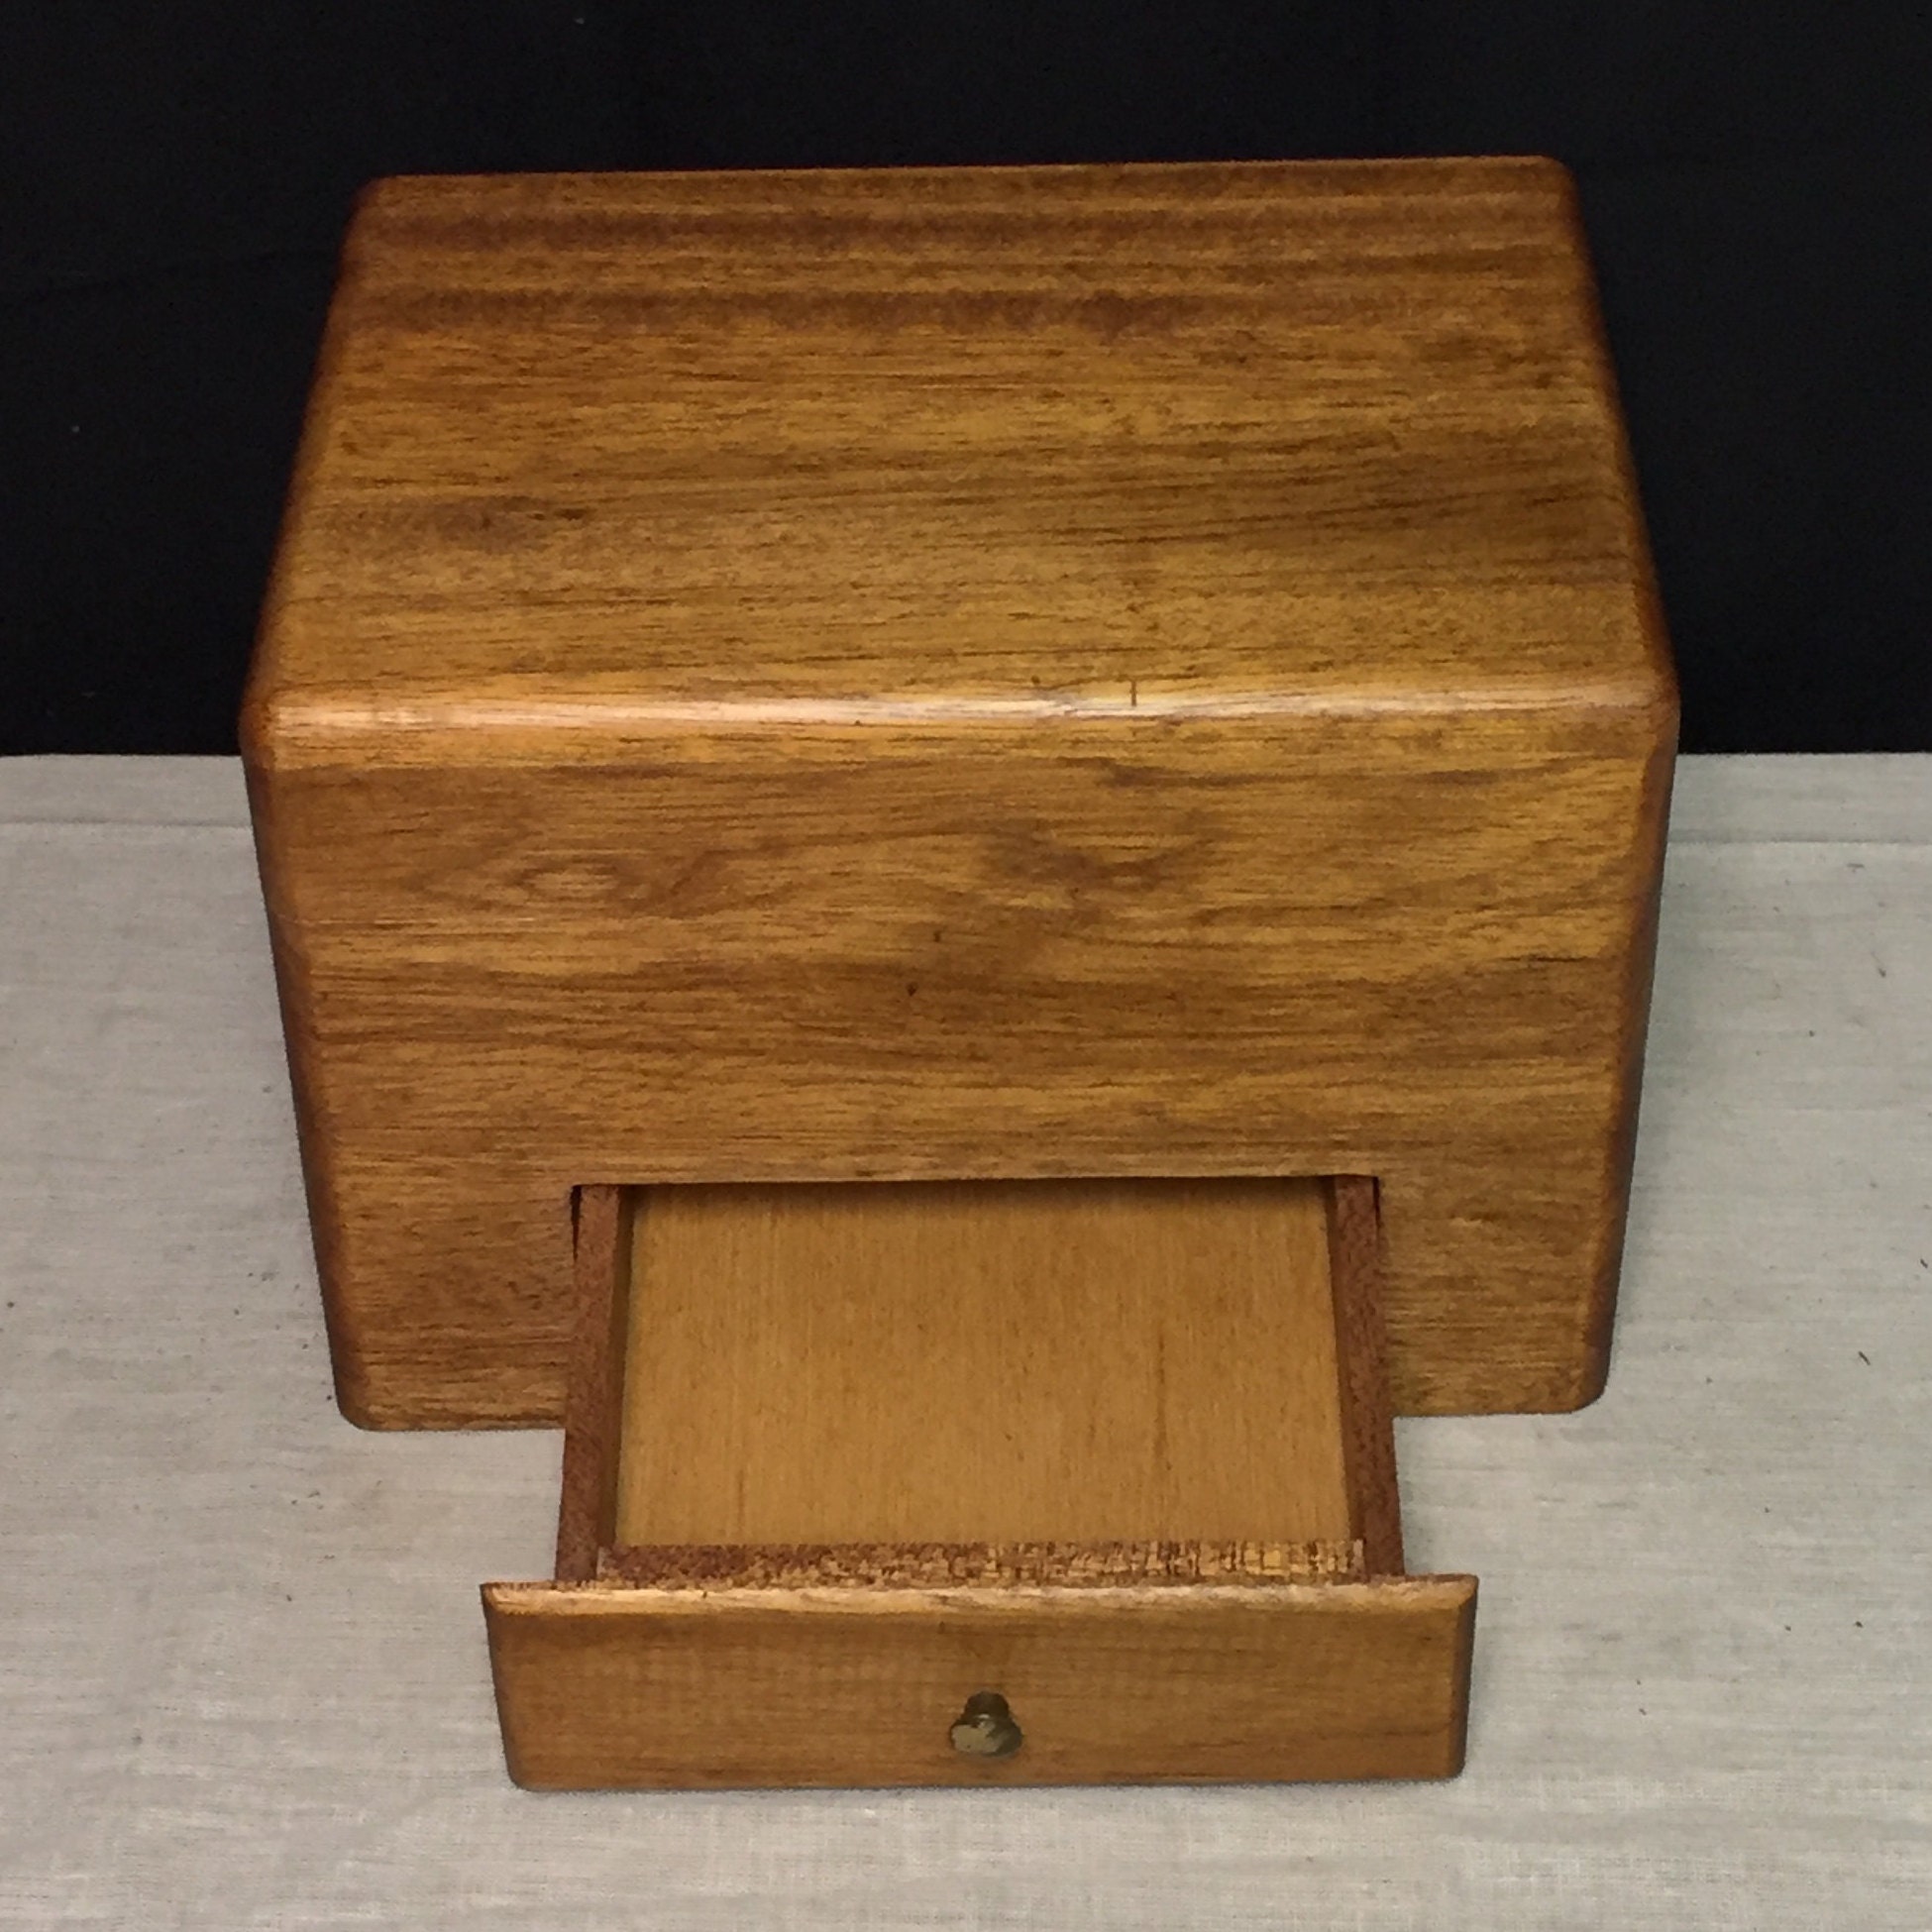 Homemade Wooden Oak Box with Drawer and Hinged Lid 